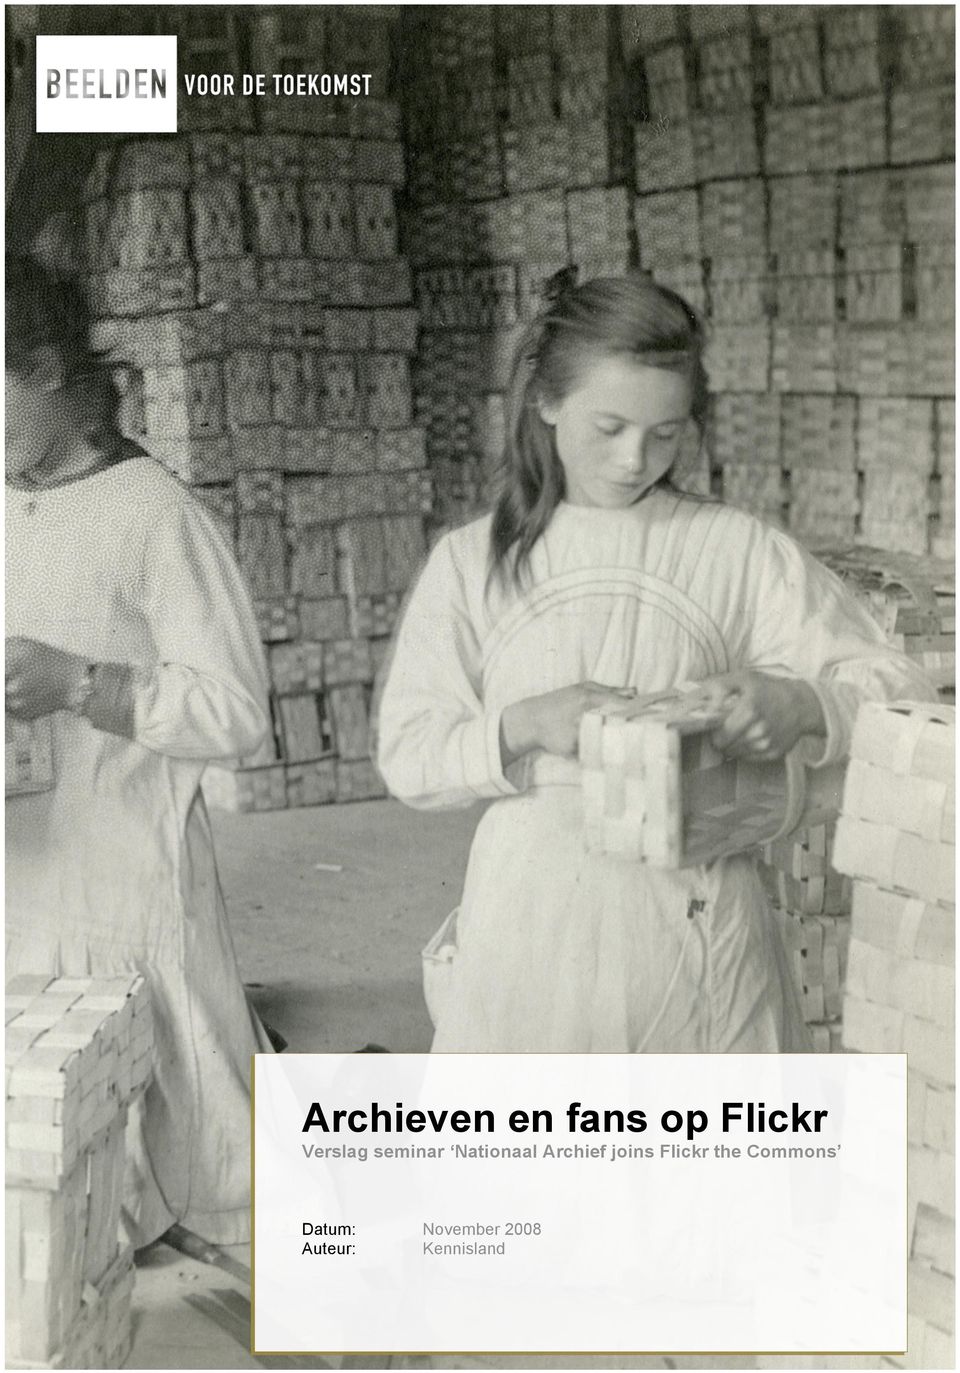 Archief joins Flickr the